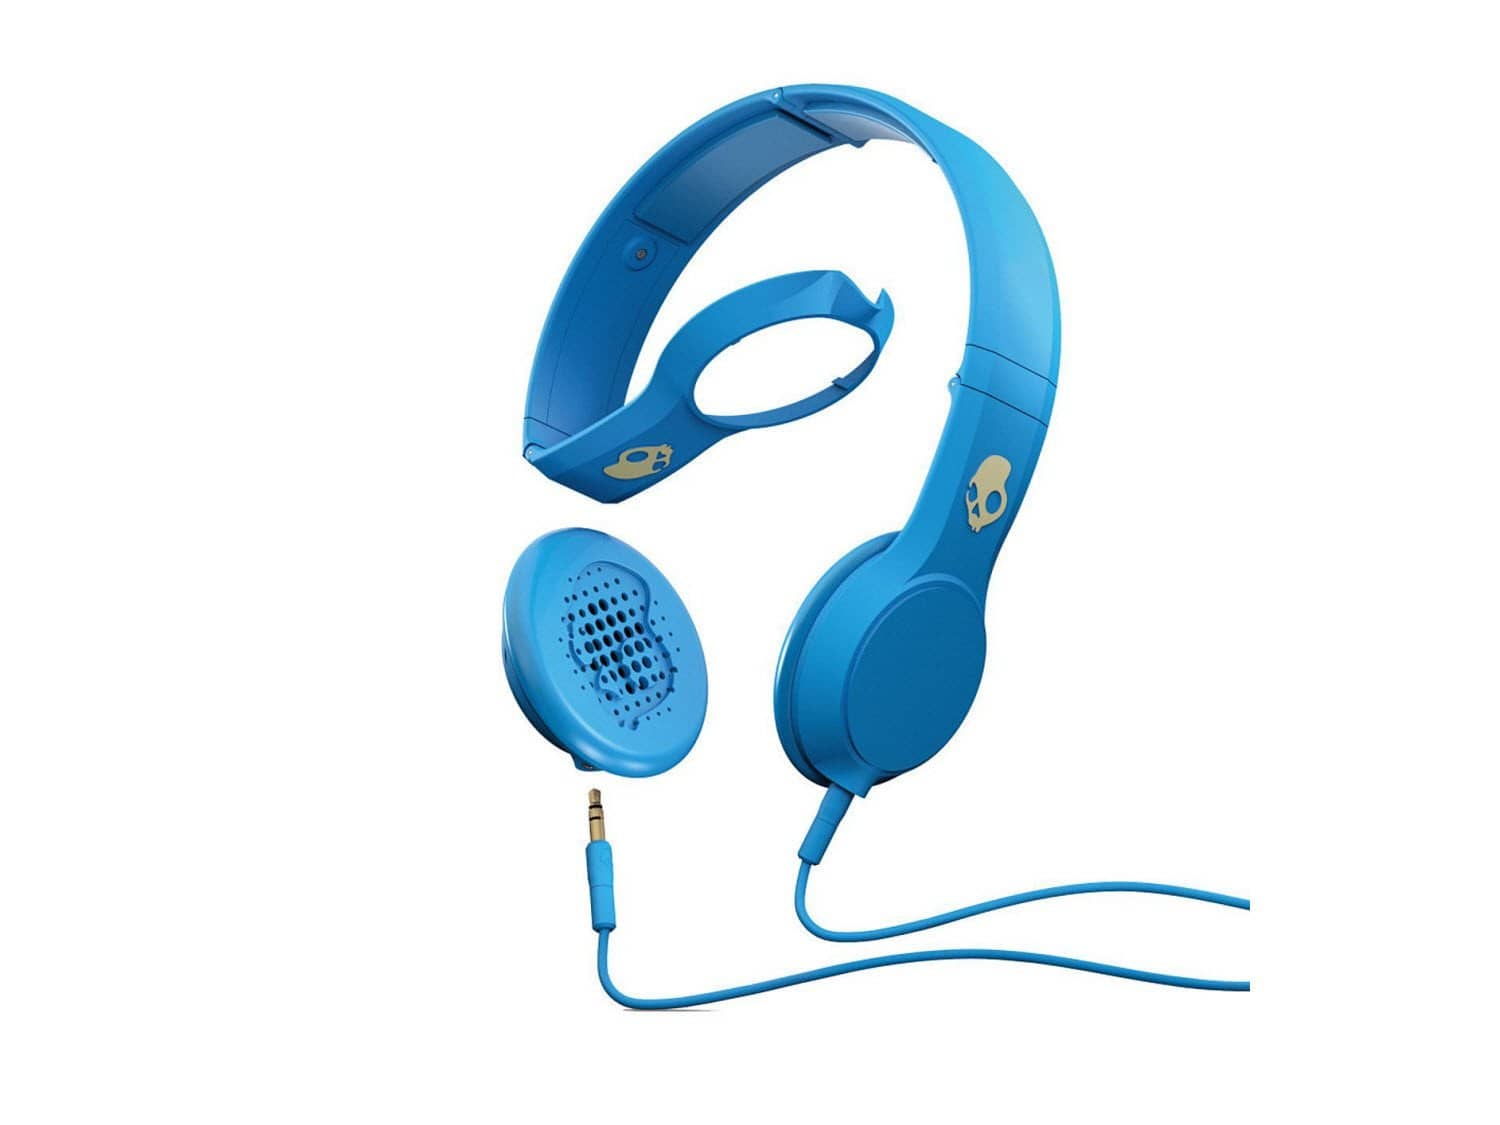 Skullcandy The Cassette Headphones with Mic in Athletic Blue